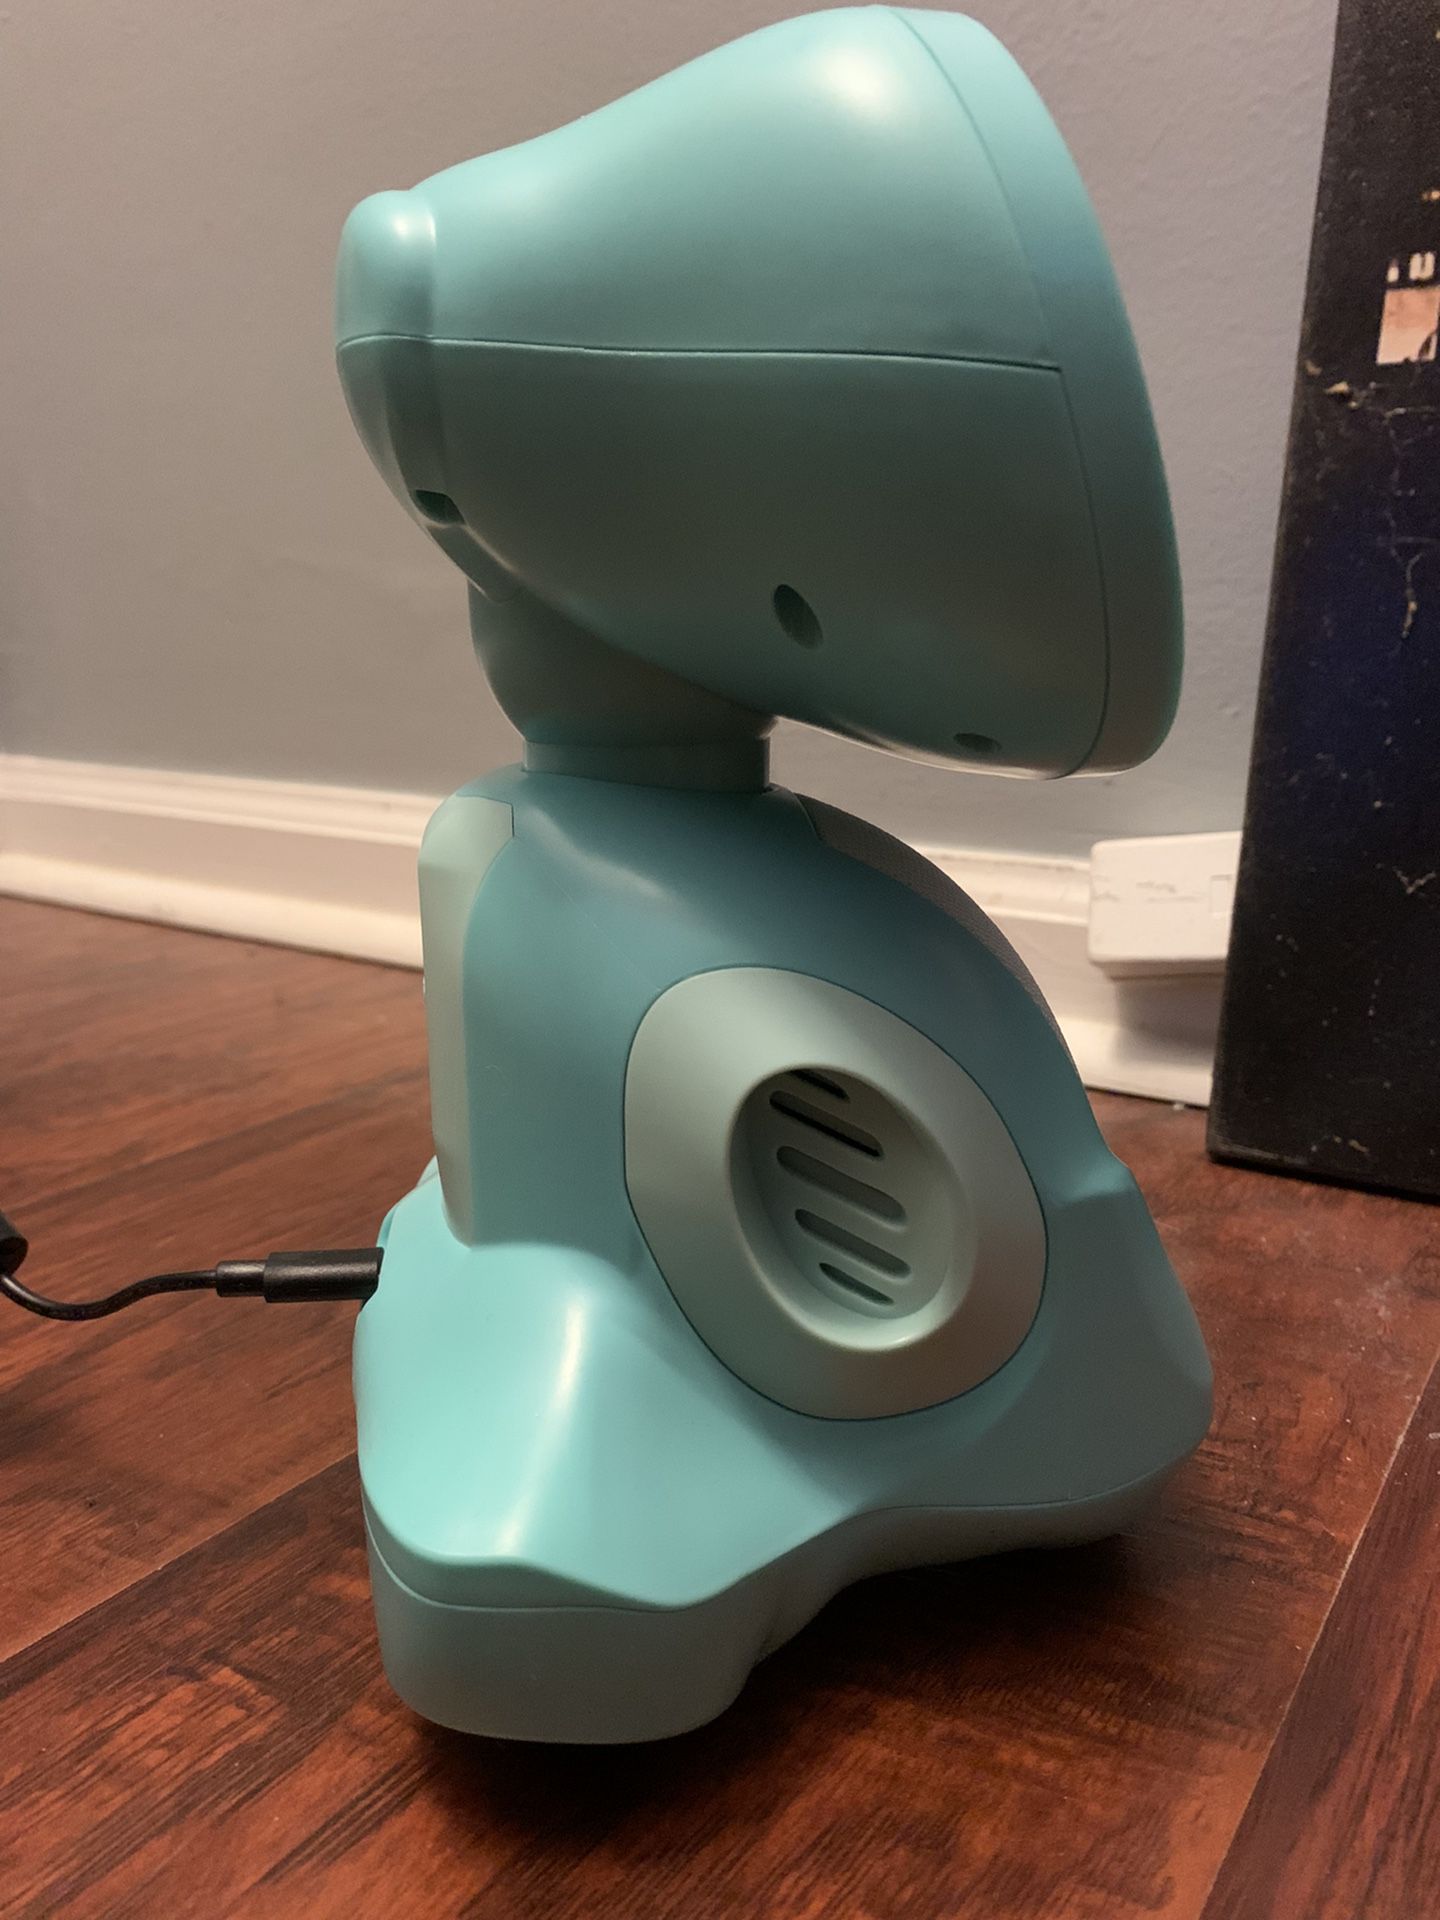 Miko 3: AI-Powered Smart Robot for Kids | Stem Learning & Educational Robot | in